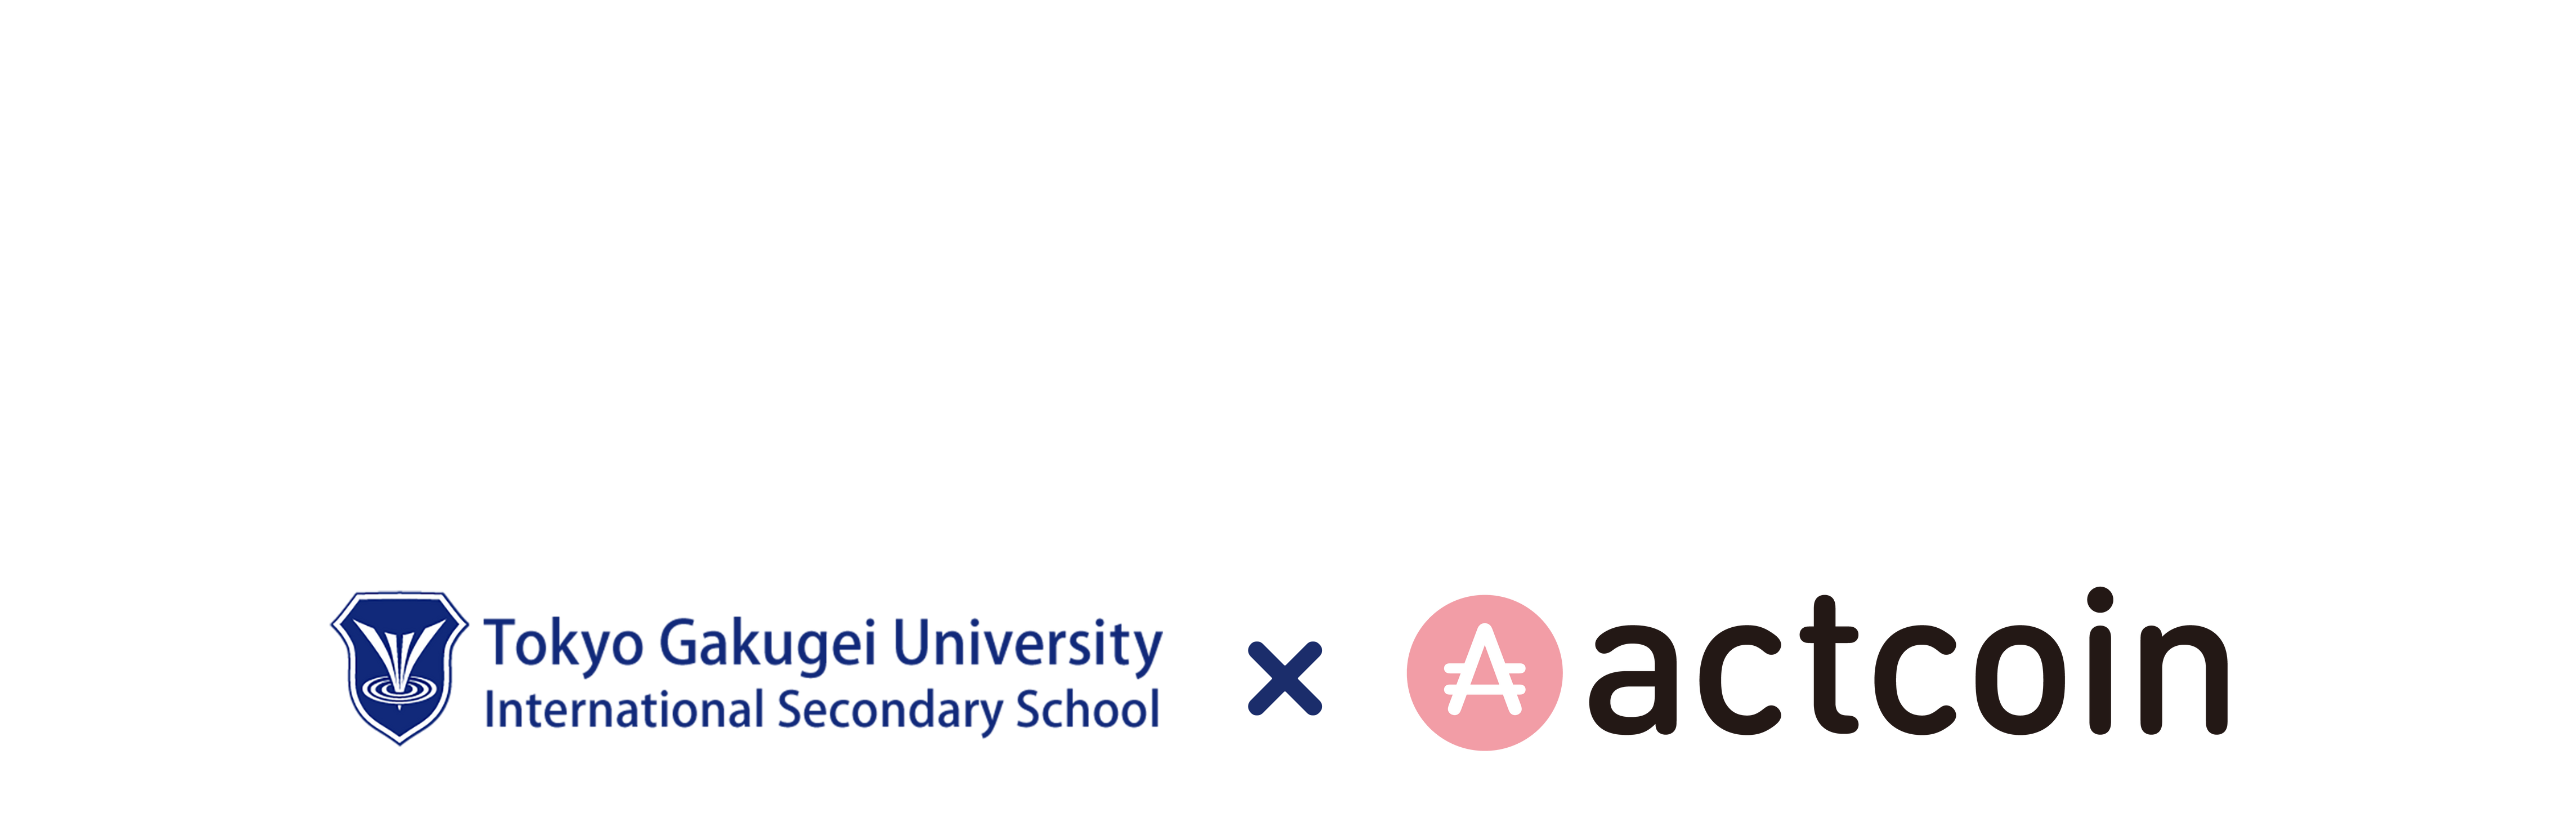 ISS actcoin project ISS×actcoin